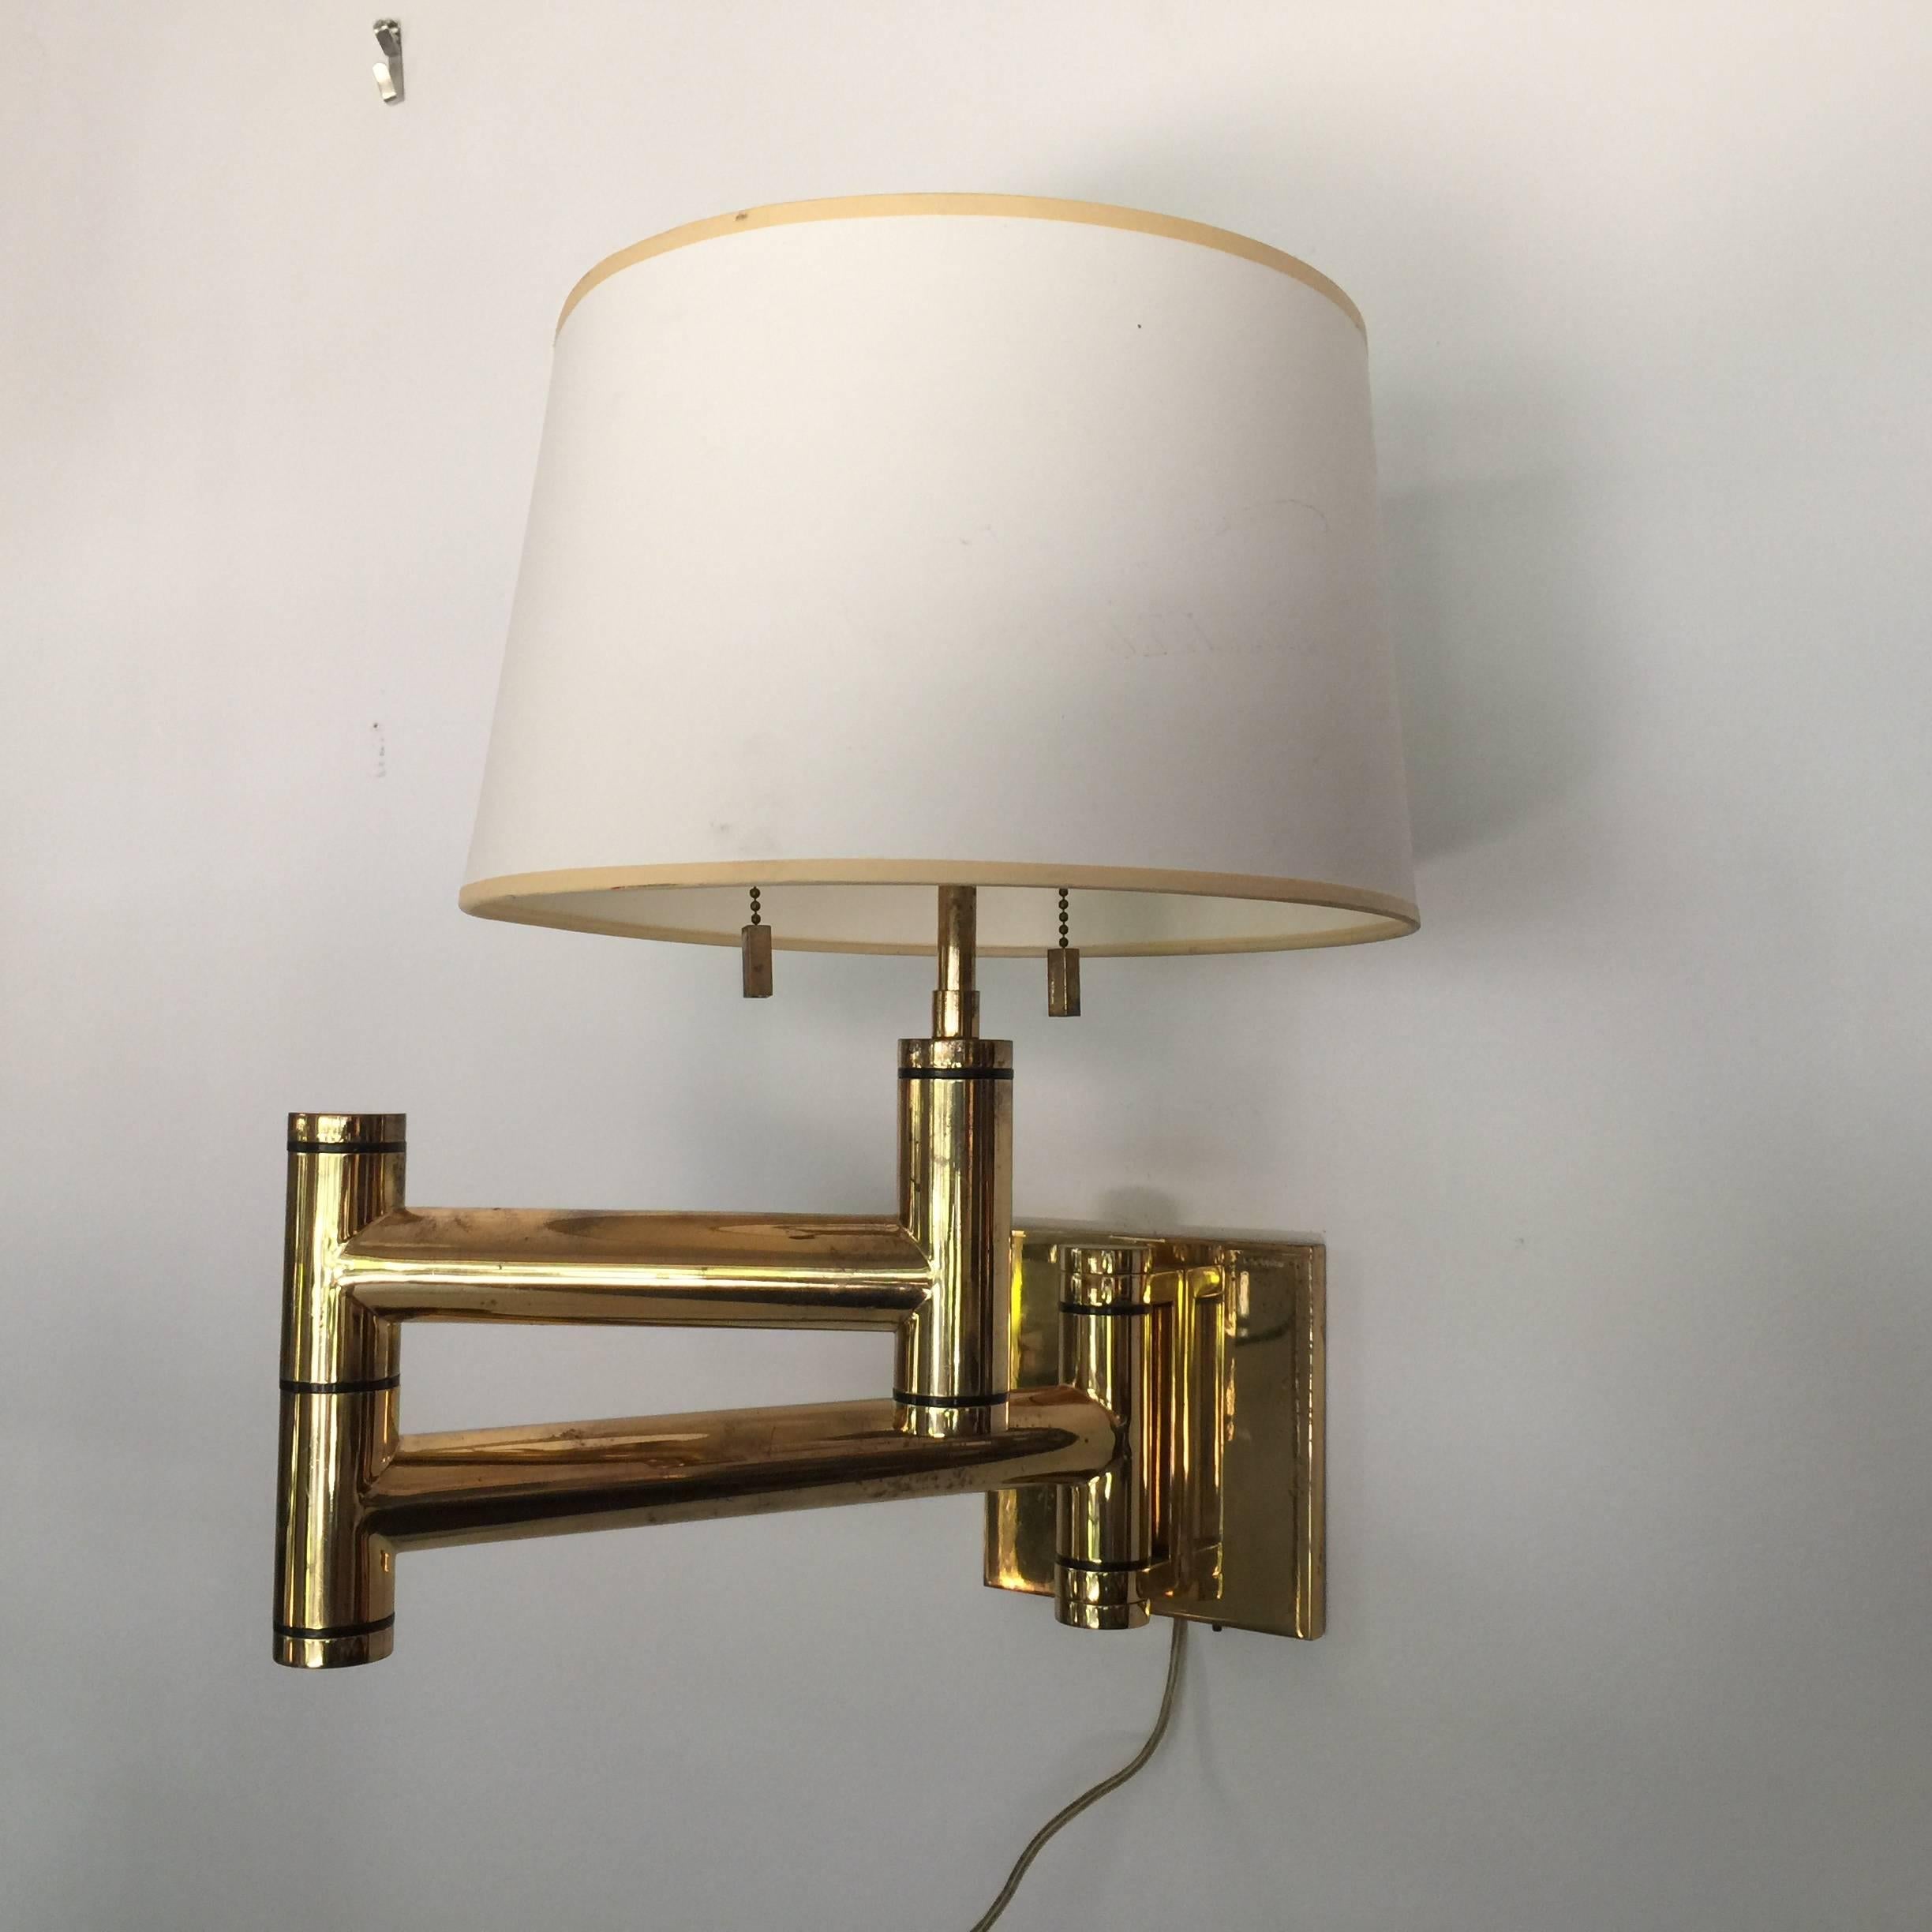 Pair of Karl Springer lamps from 1970s. High quality craftsmanship made in America. All parts including finials, pulls and mounting brackets are original.

27 inches deep when fully extended out - shades are vintage. Back plate measures 6